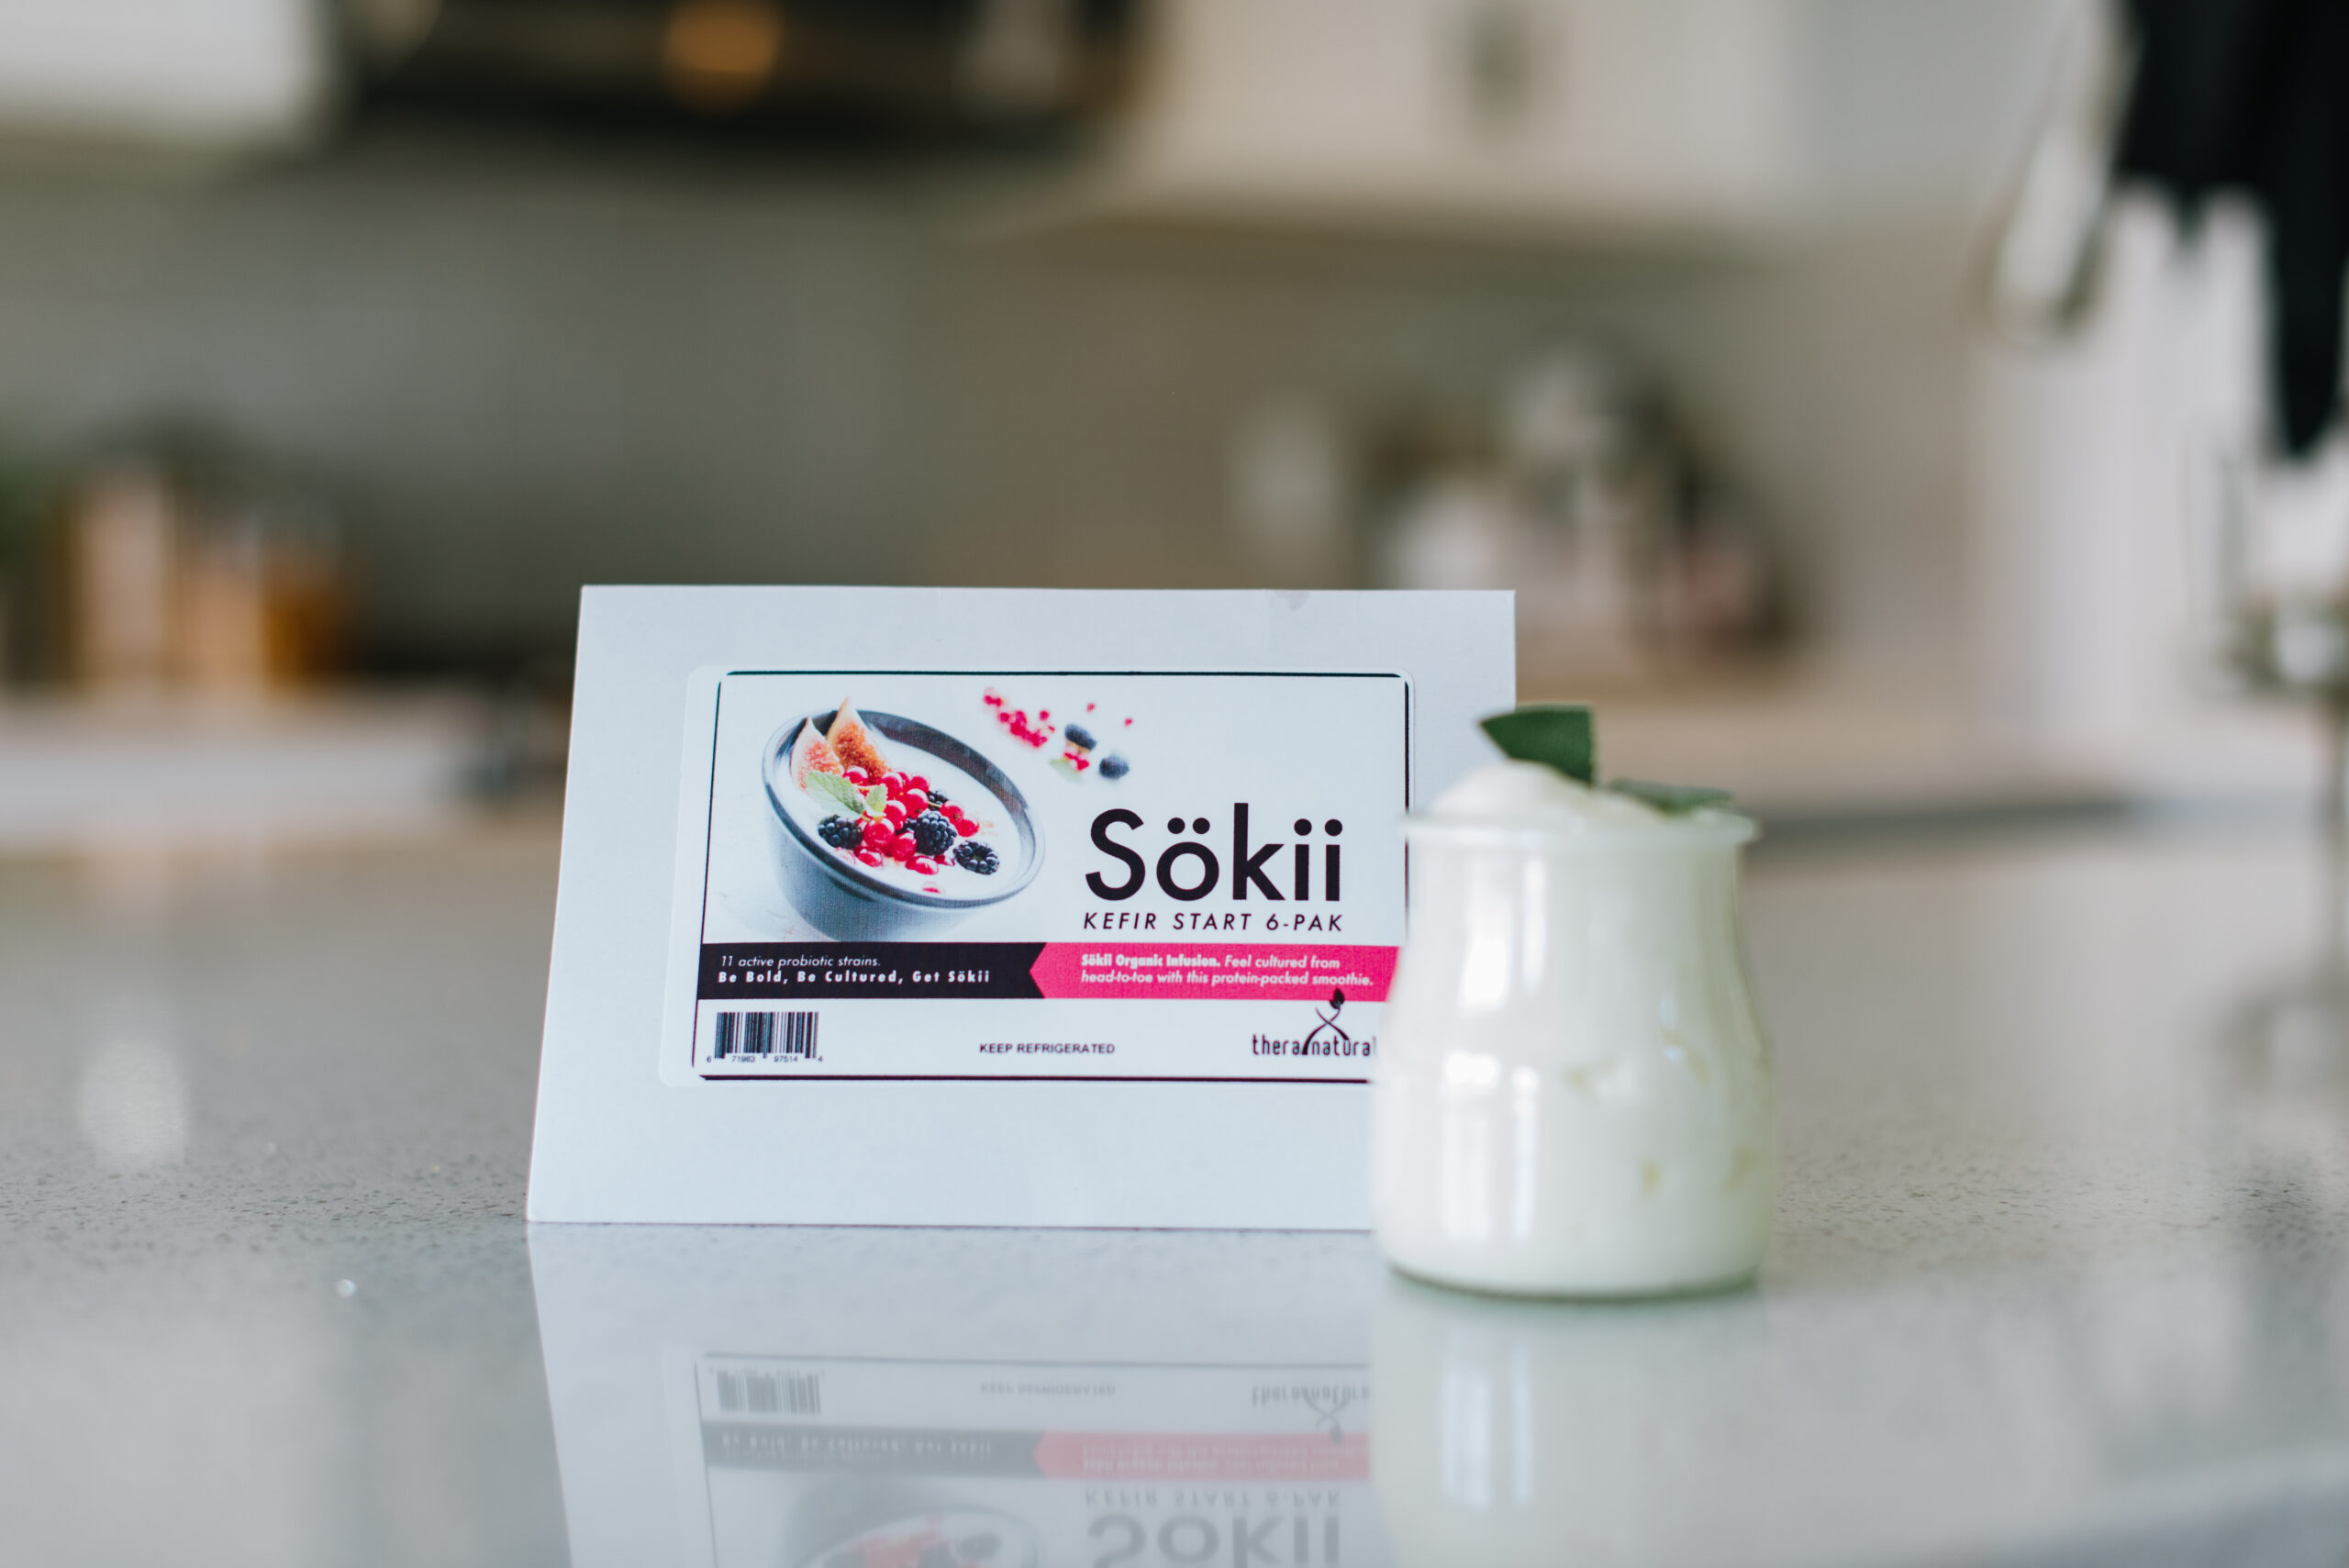 Soki Kefir packet and cup on countertop